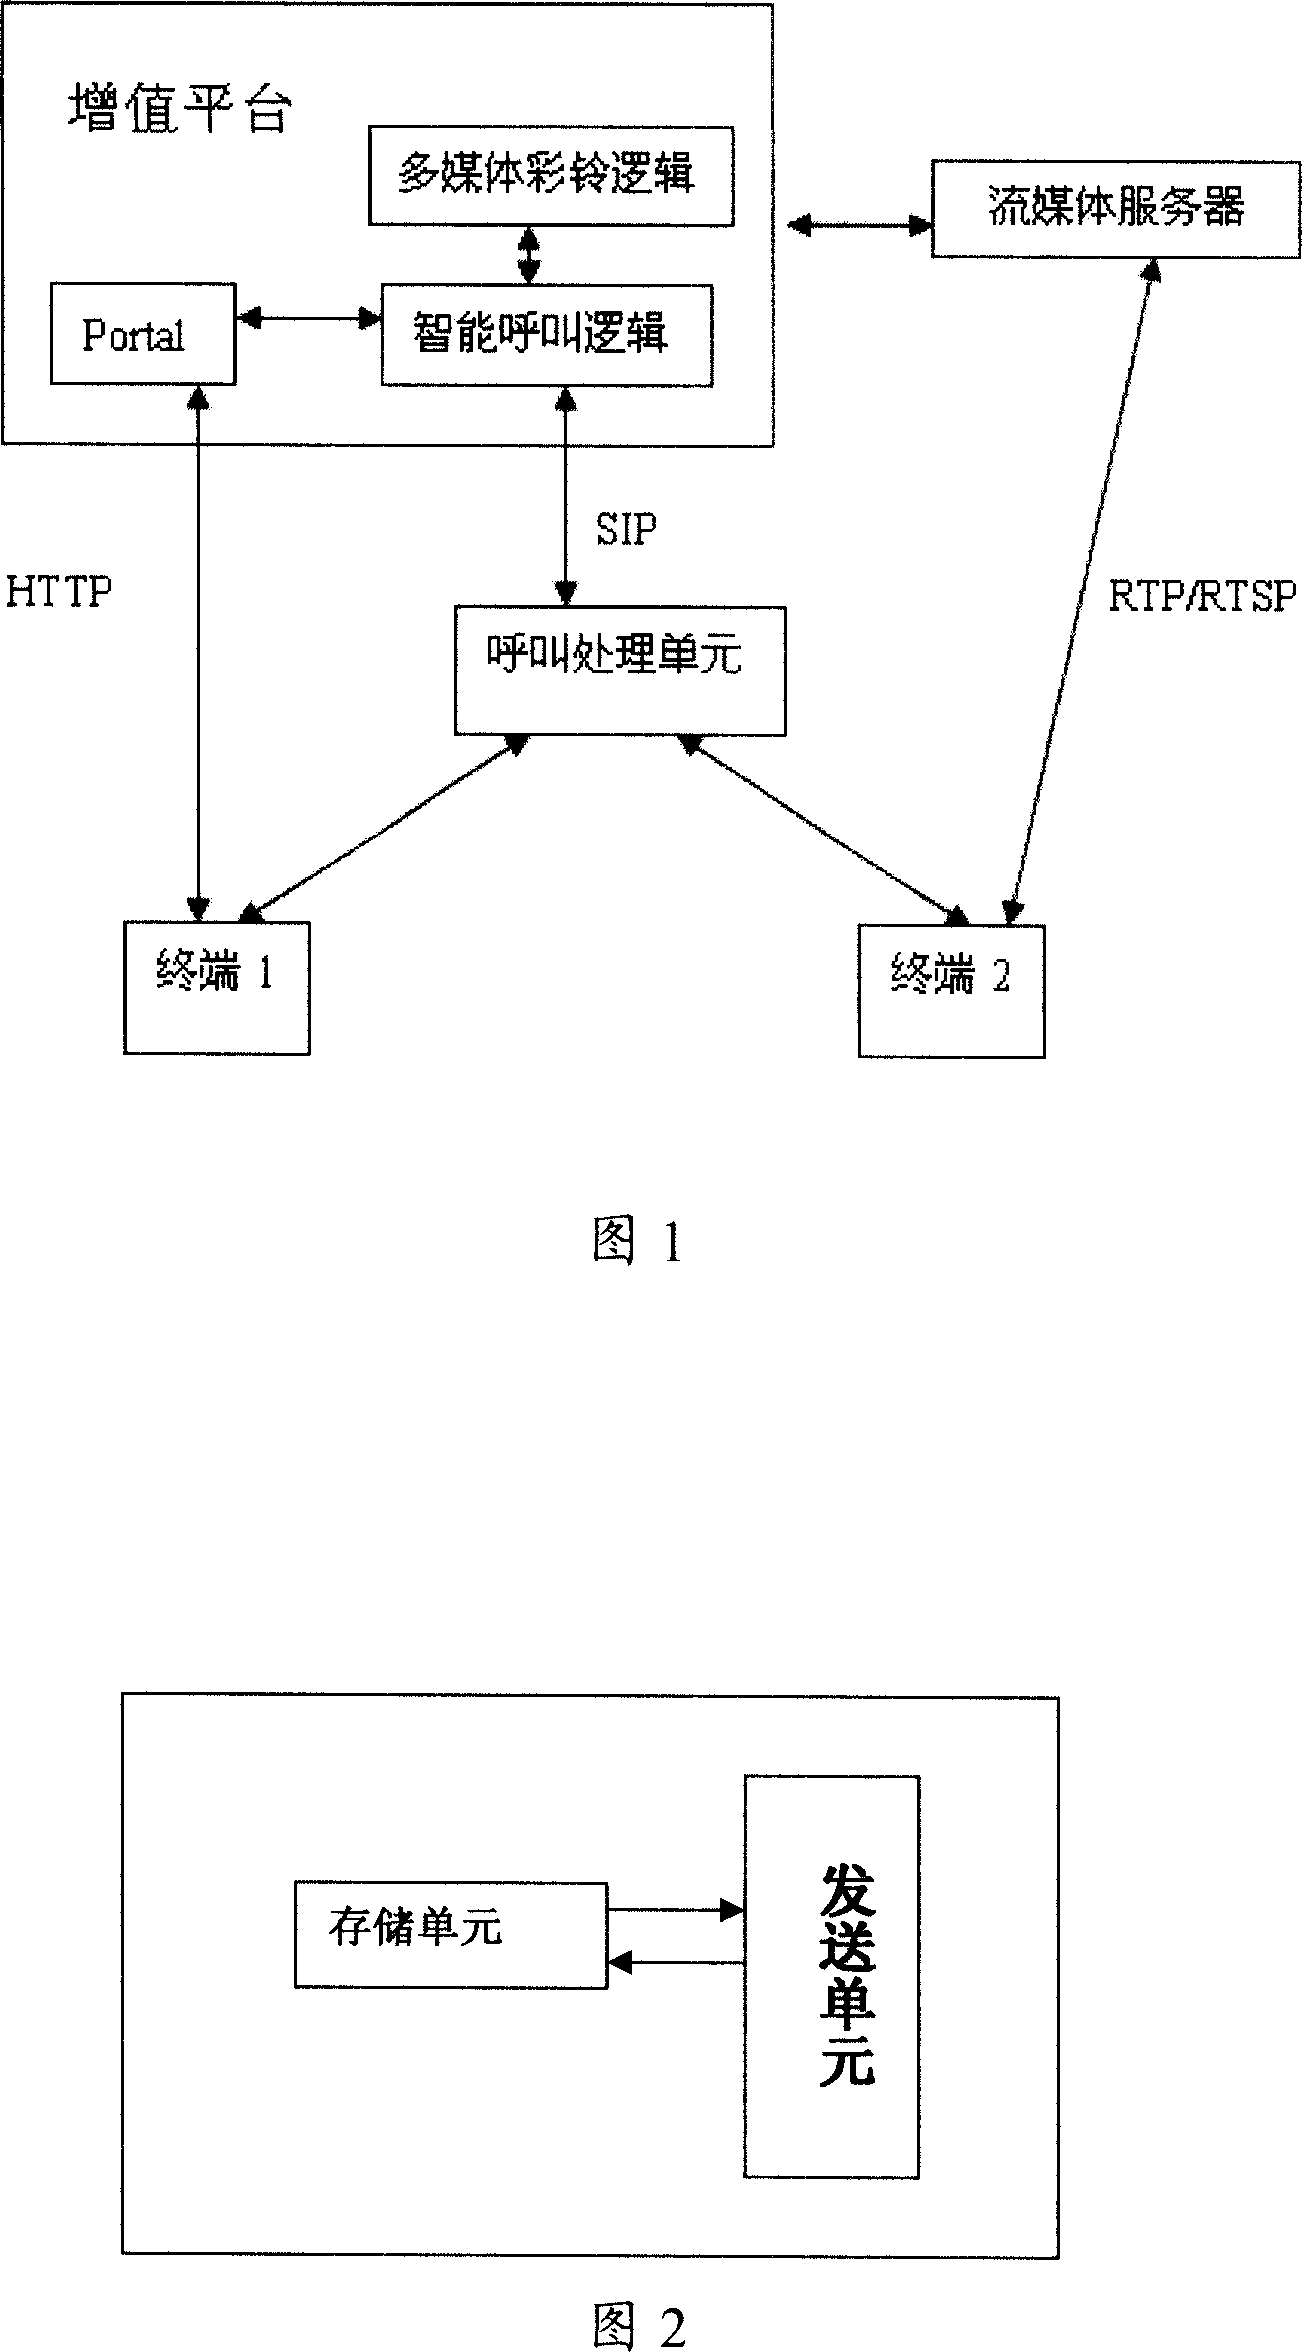 A method, terminal and system for multi-media information transfer